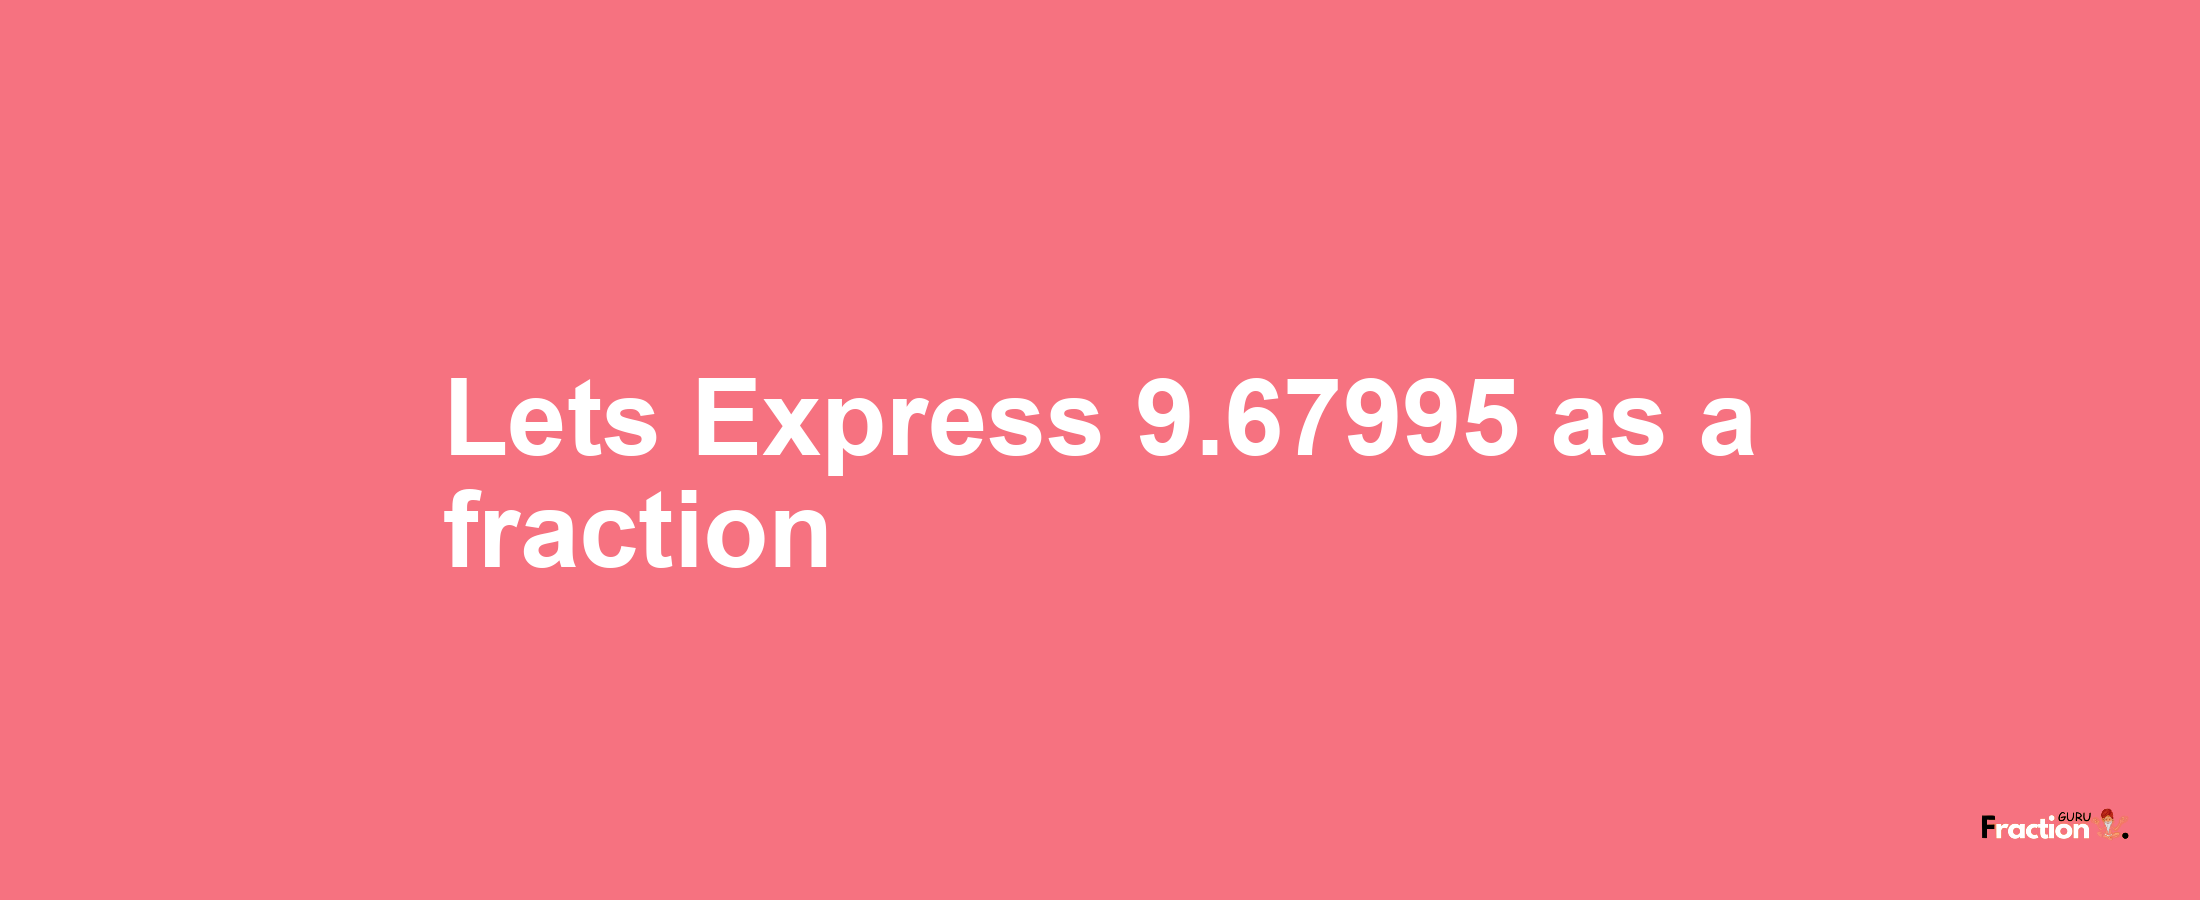 Lets Express 9.67995 as afraction